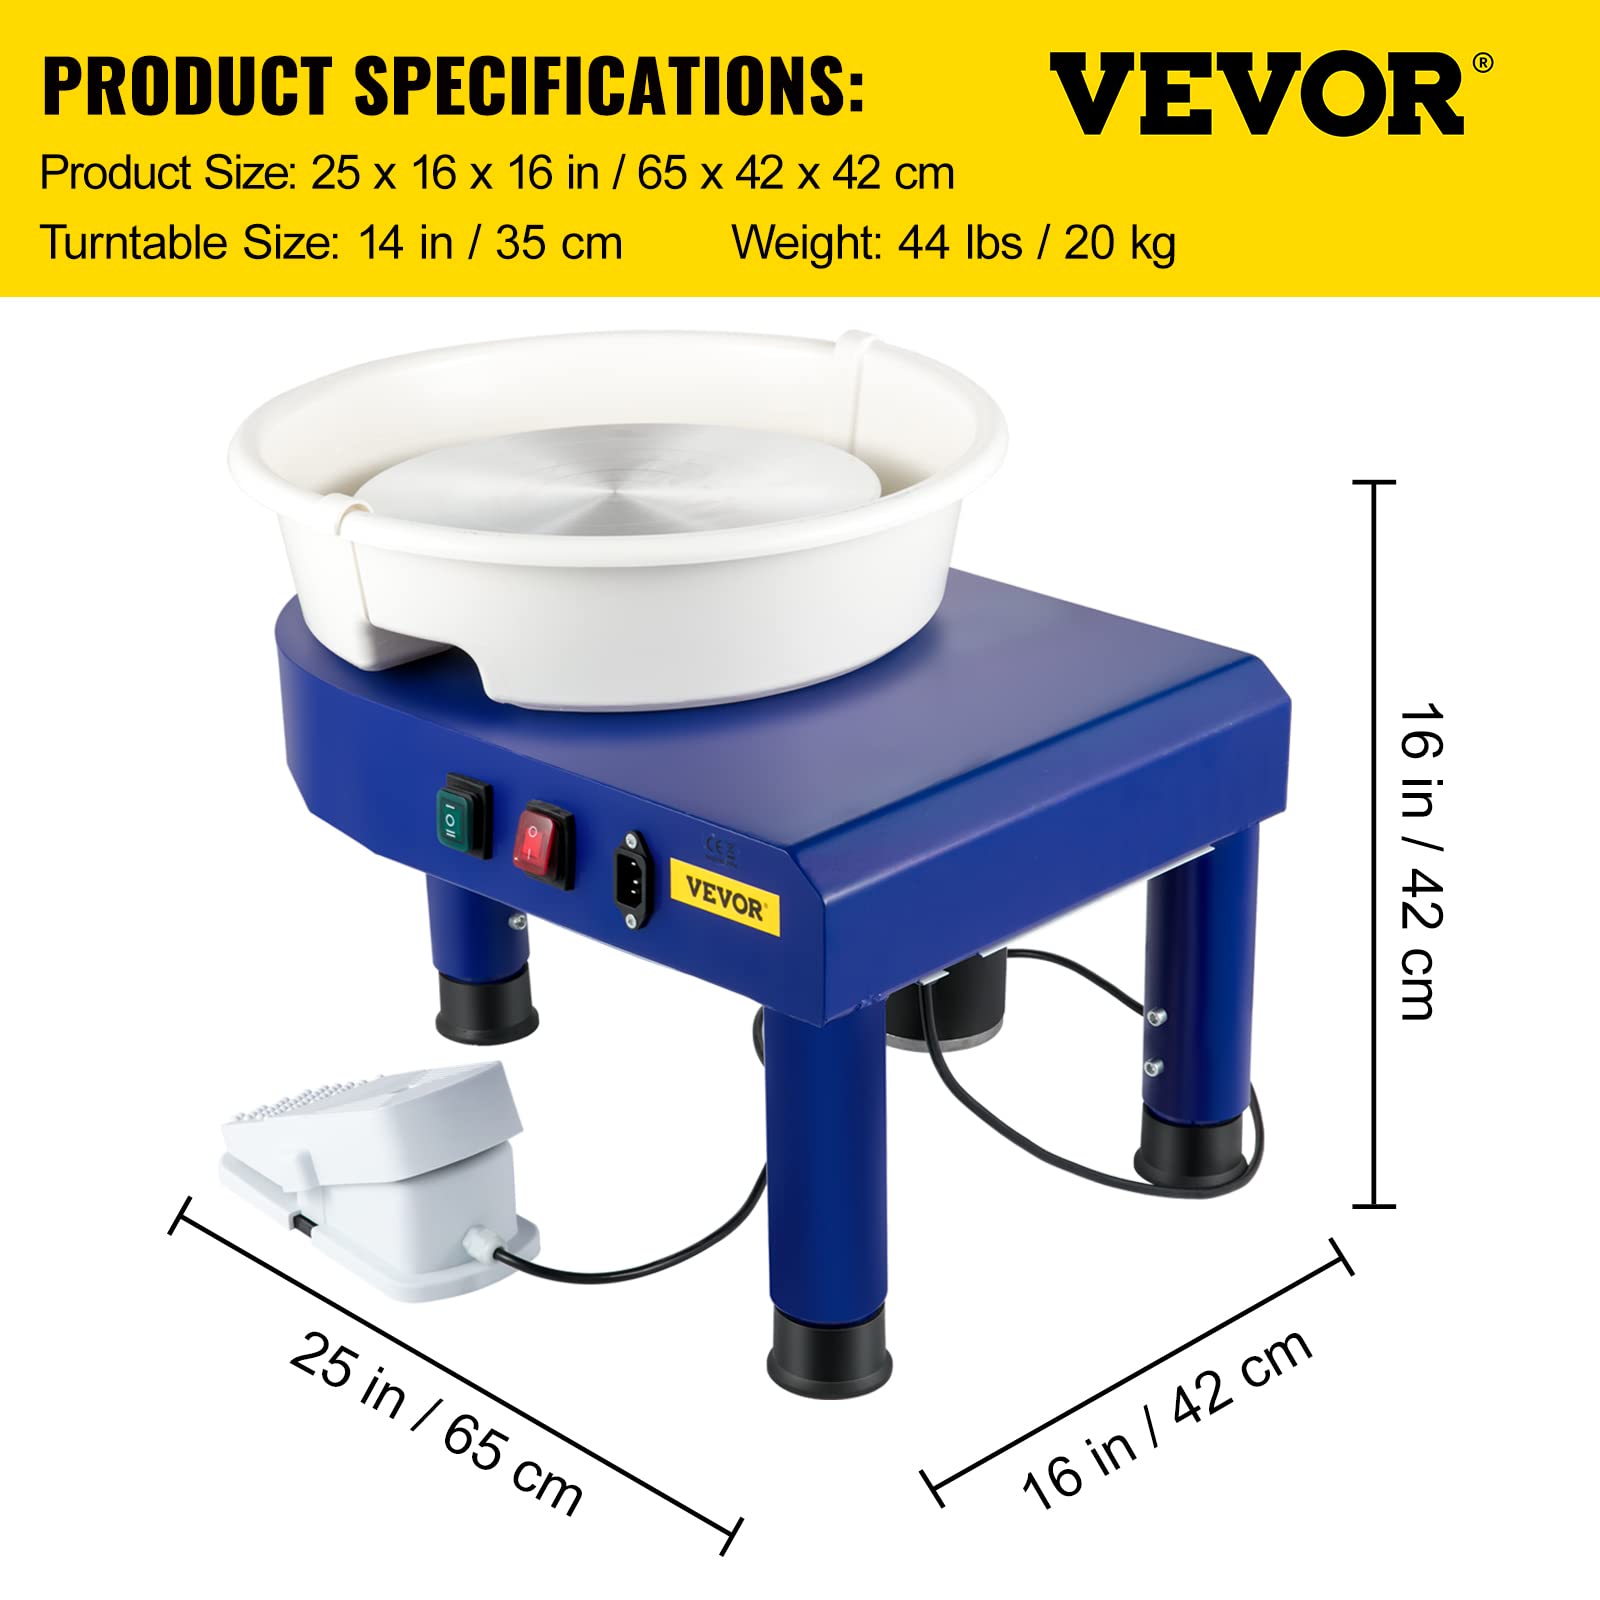 VEVOR 0-7.8in Lift-Table 0-300RPM Electric Clay Machine Pottery Wheel with Foot Pedal Detachable Basin Sculpting Tool Accessory Kit, Blue